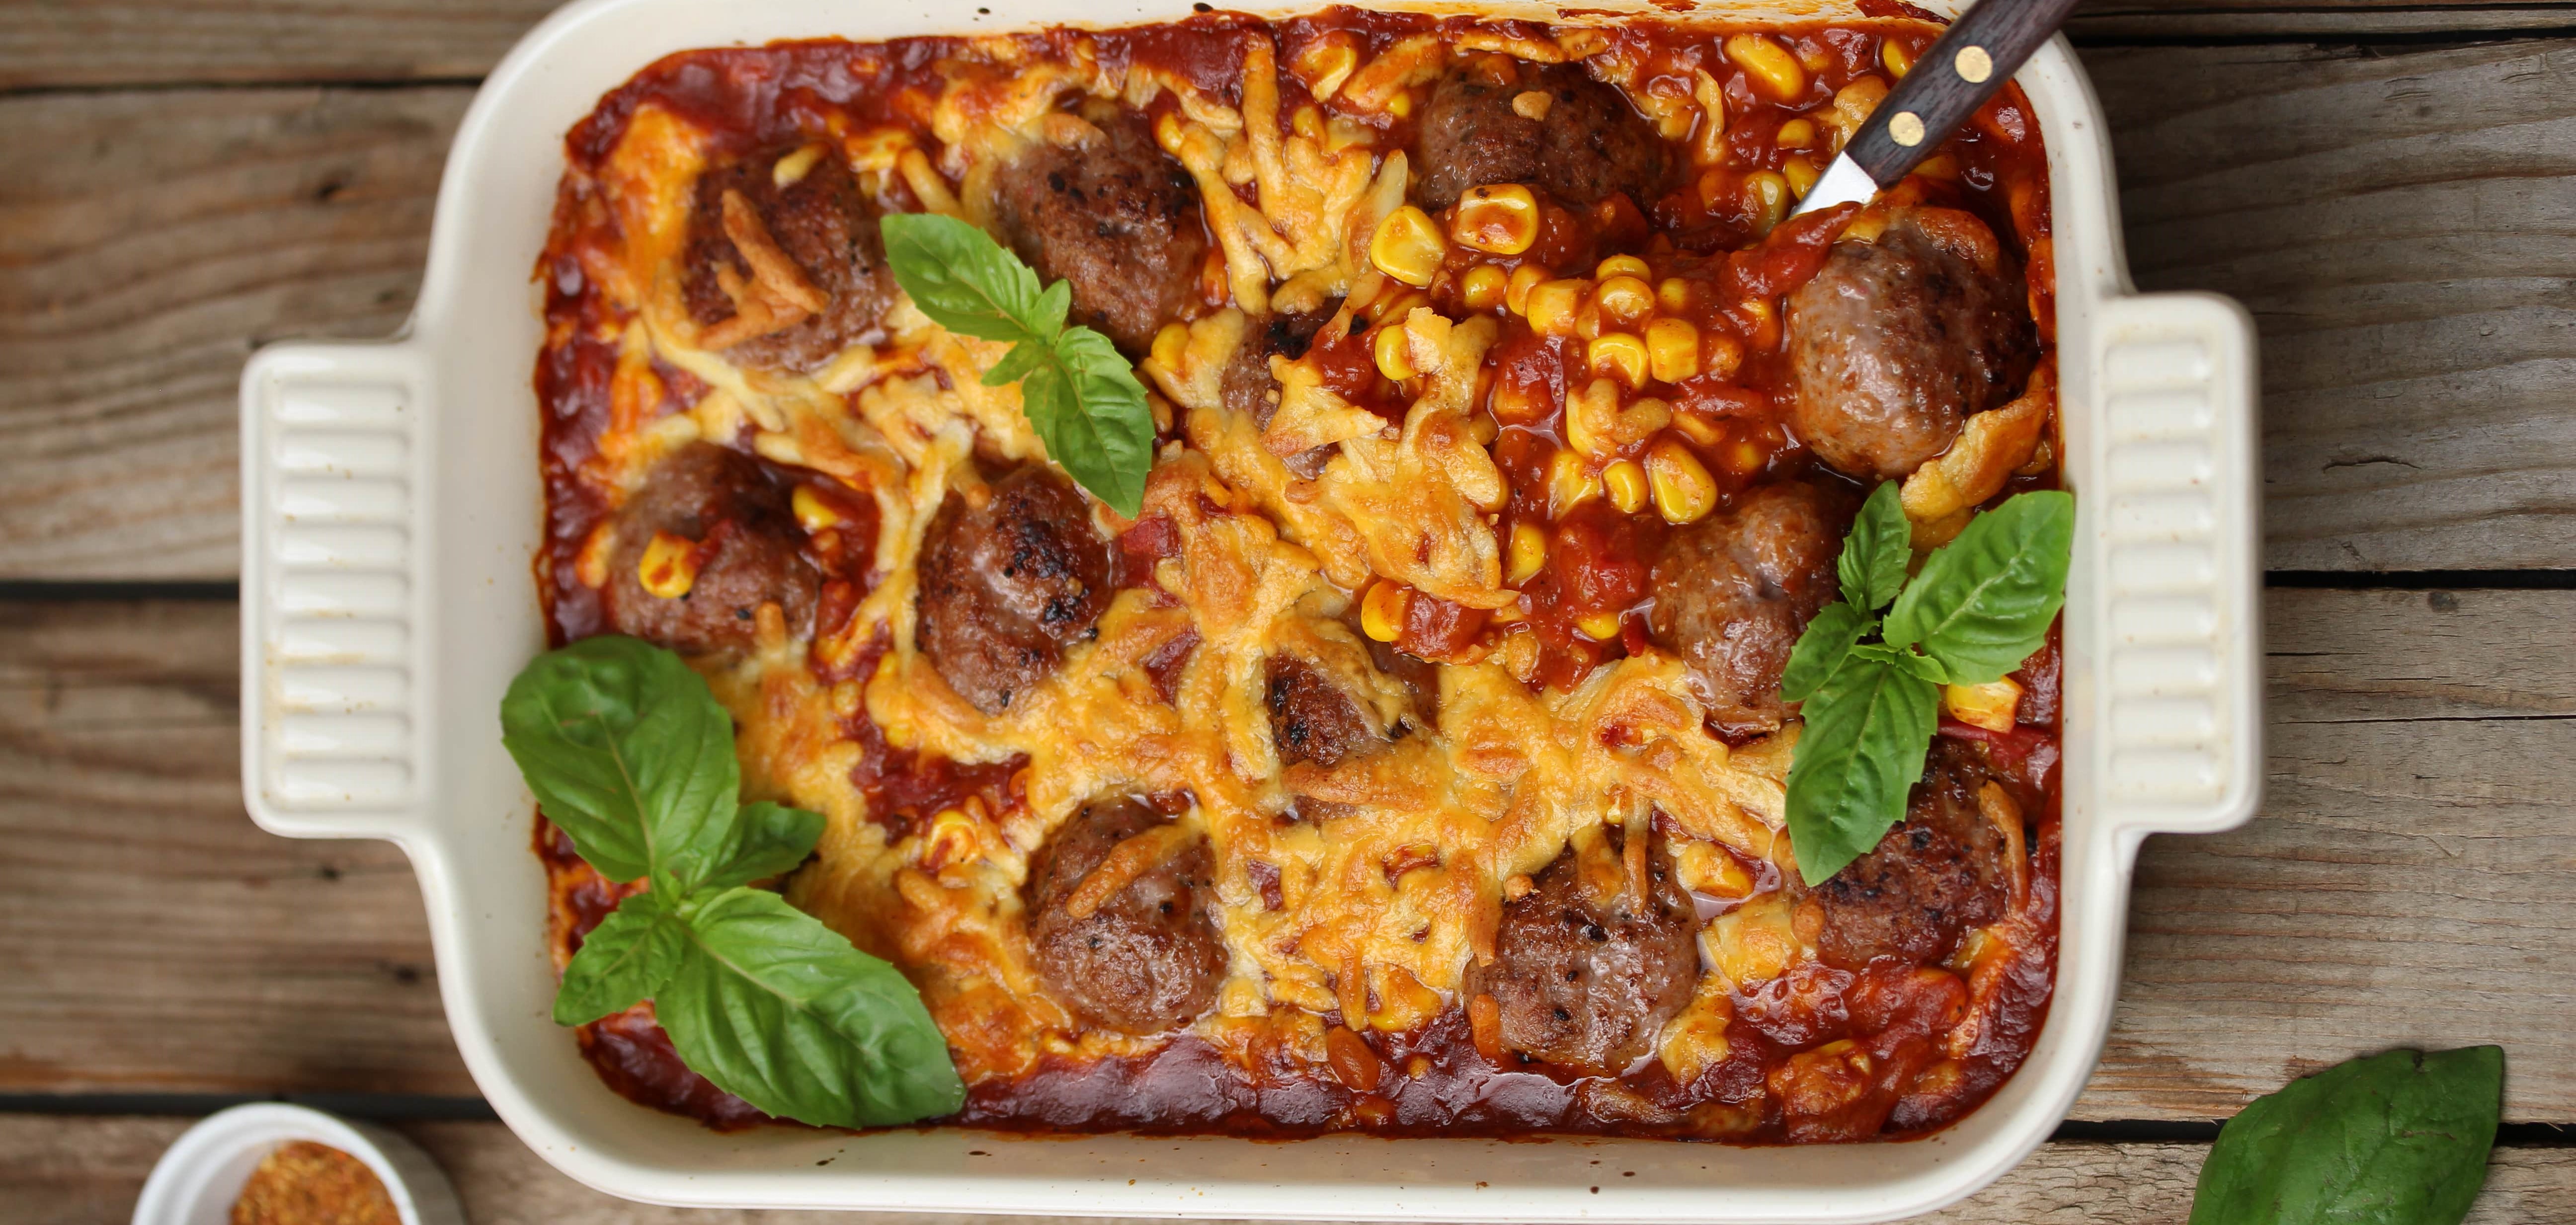 Baked Meatballs with Corn